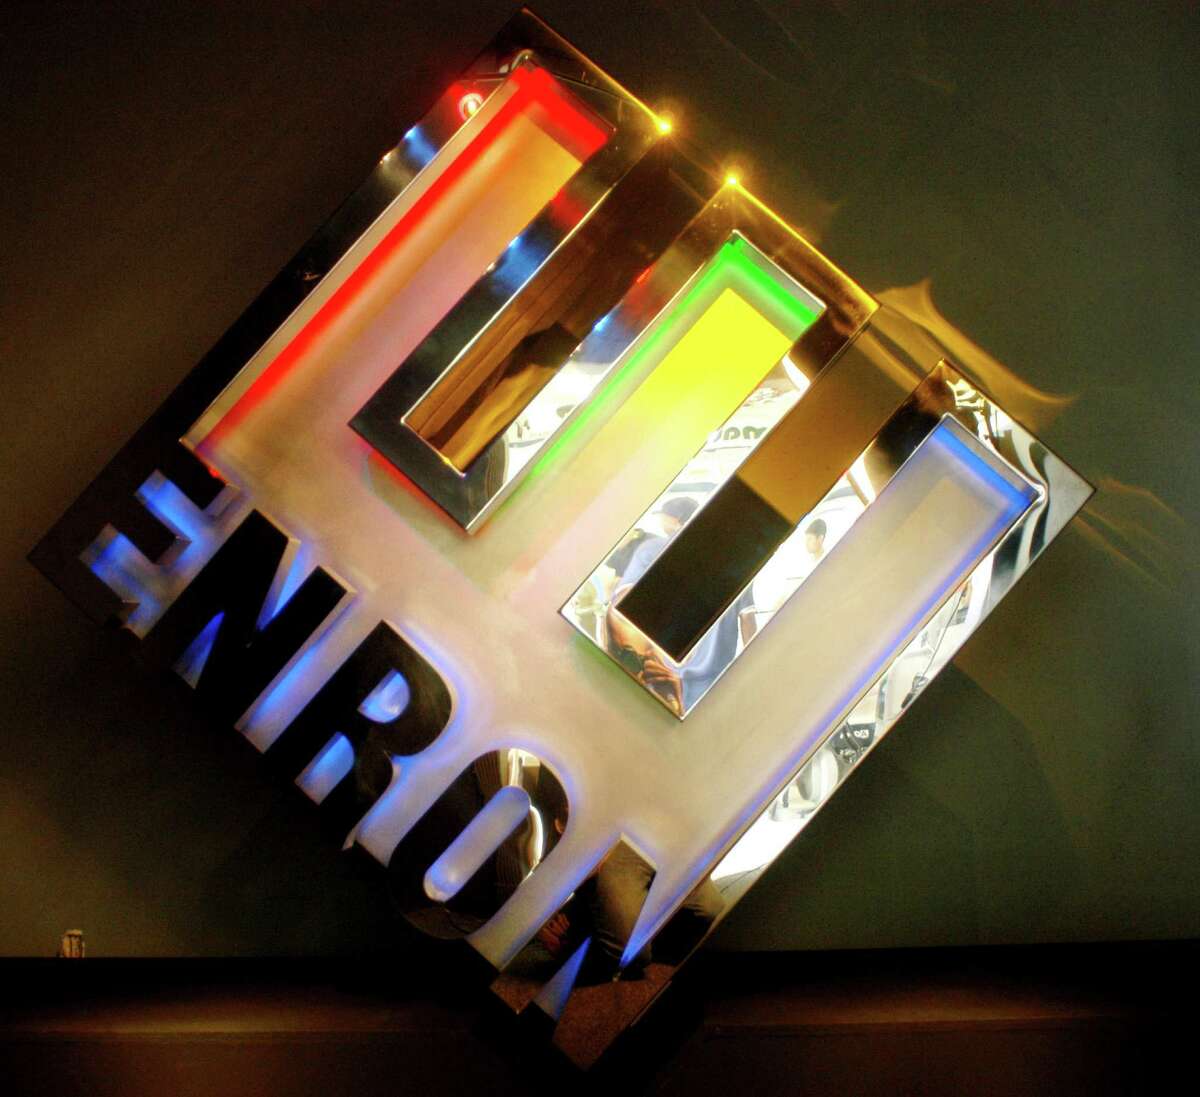 In total, 32 people and one firm had charges brought before federal courts stemming from the energy giant's fallout. See what happened to some of the biggest players in the Enron scandal.